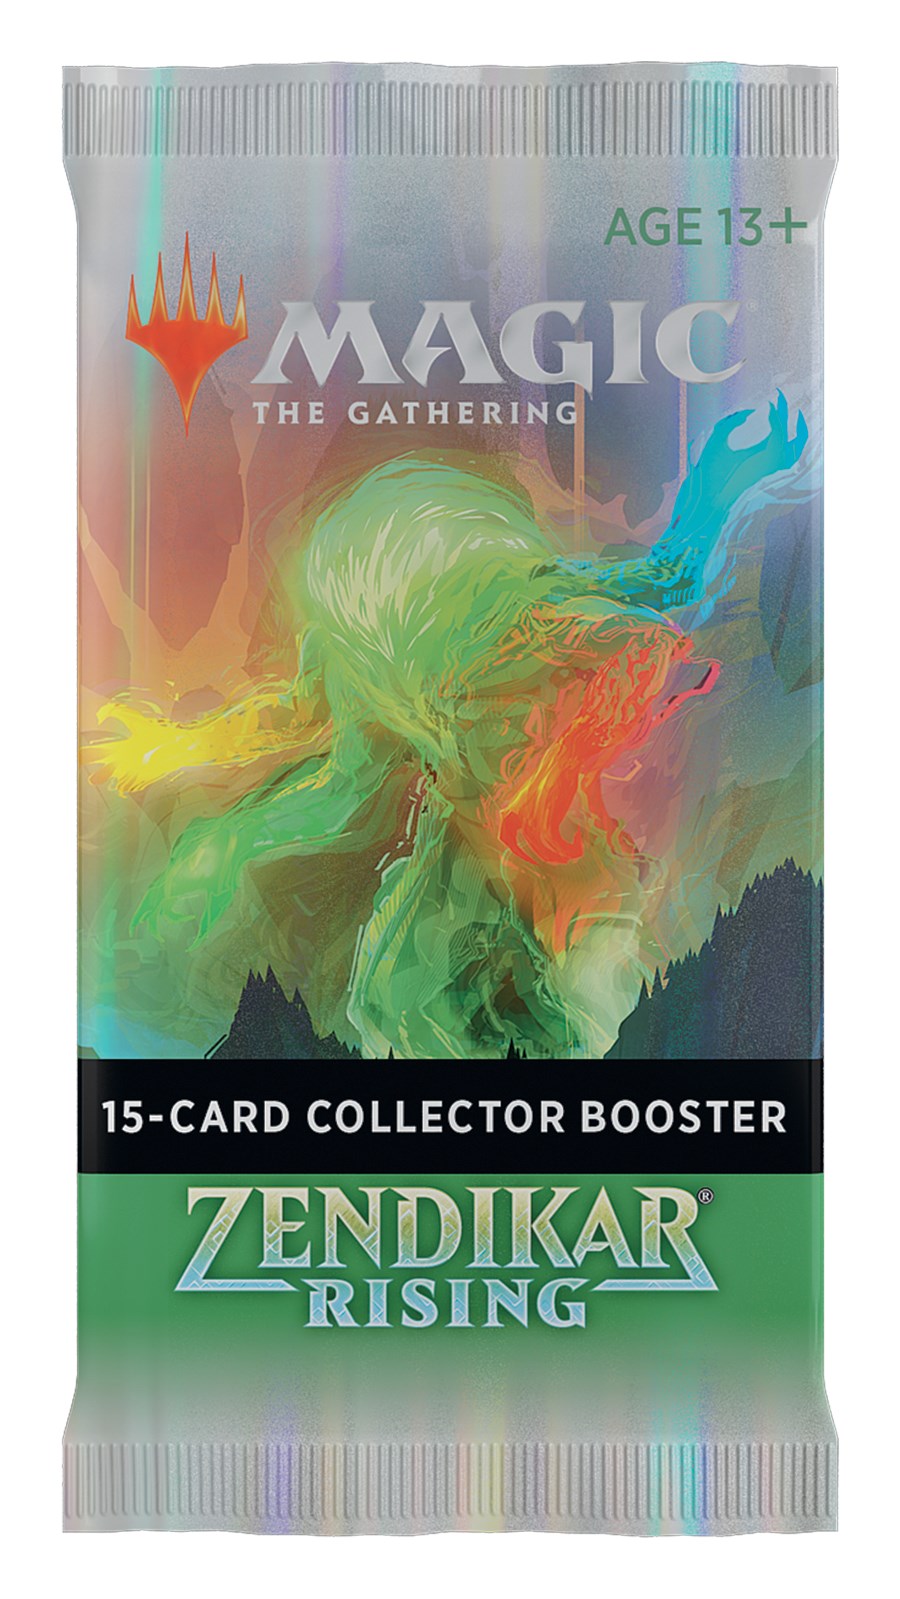 The Gathering Zendikar Rising Collector Cards Booster Box Wizards of the Coast Magic C75360000 for sale online 